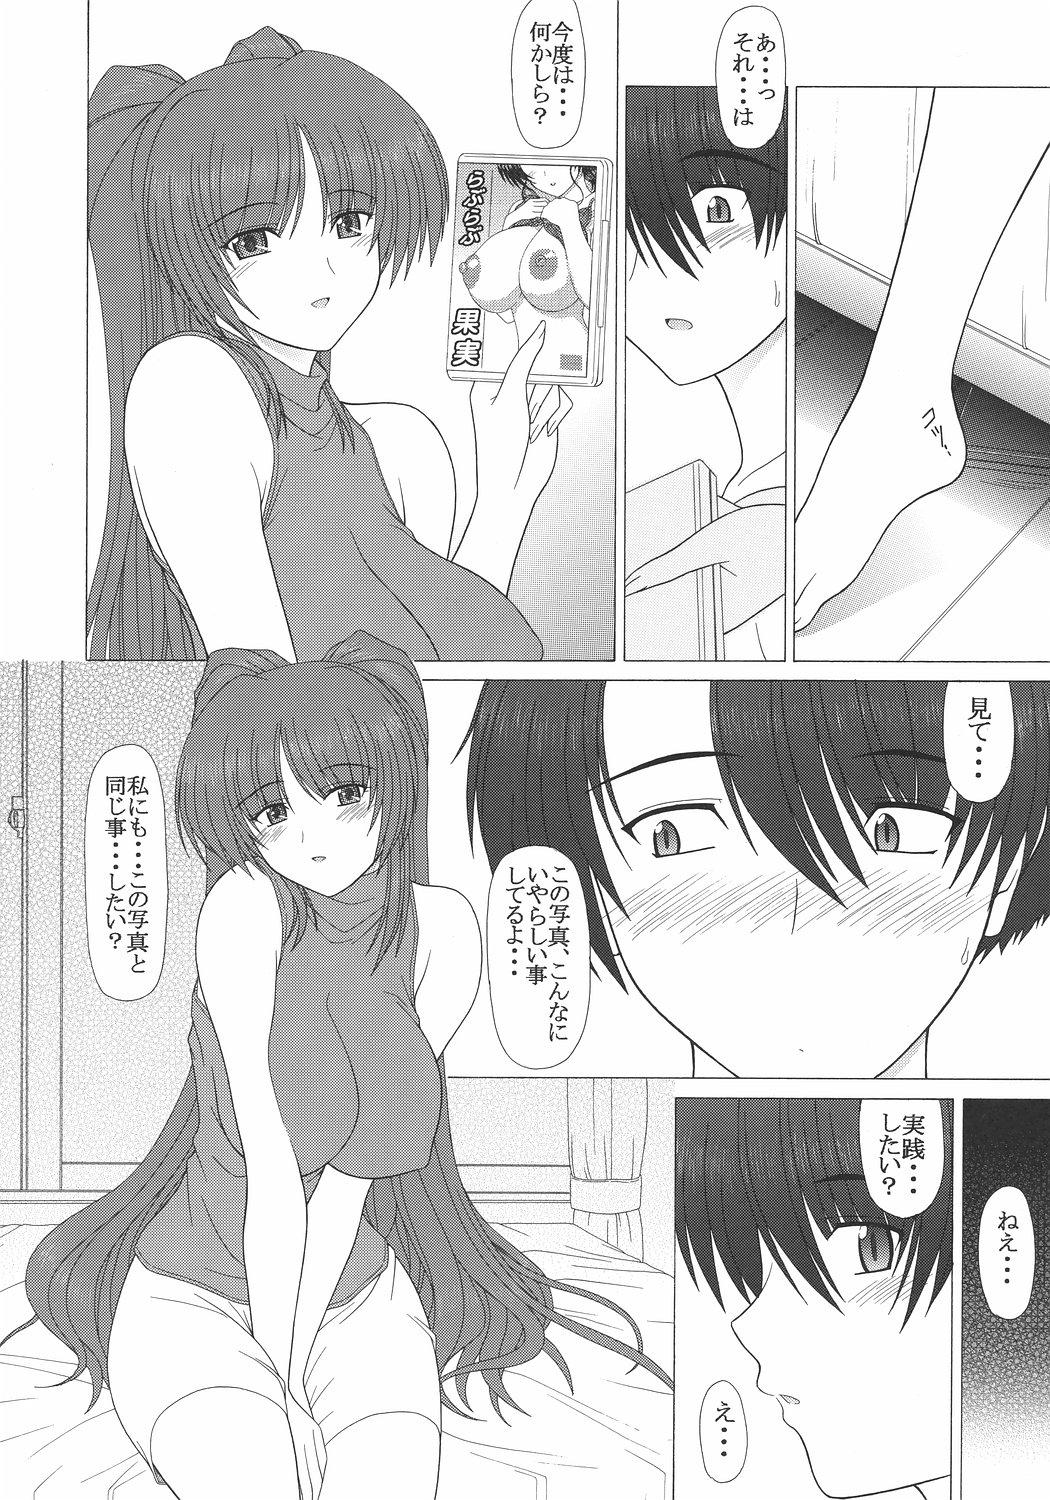 Smooth PURE NEXT GENERATION Vol. 7 Tama-nee to Love Love - Toheart2 Jerking - Page 9